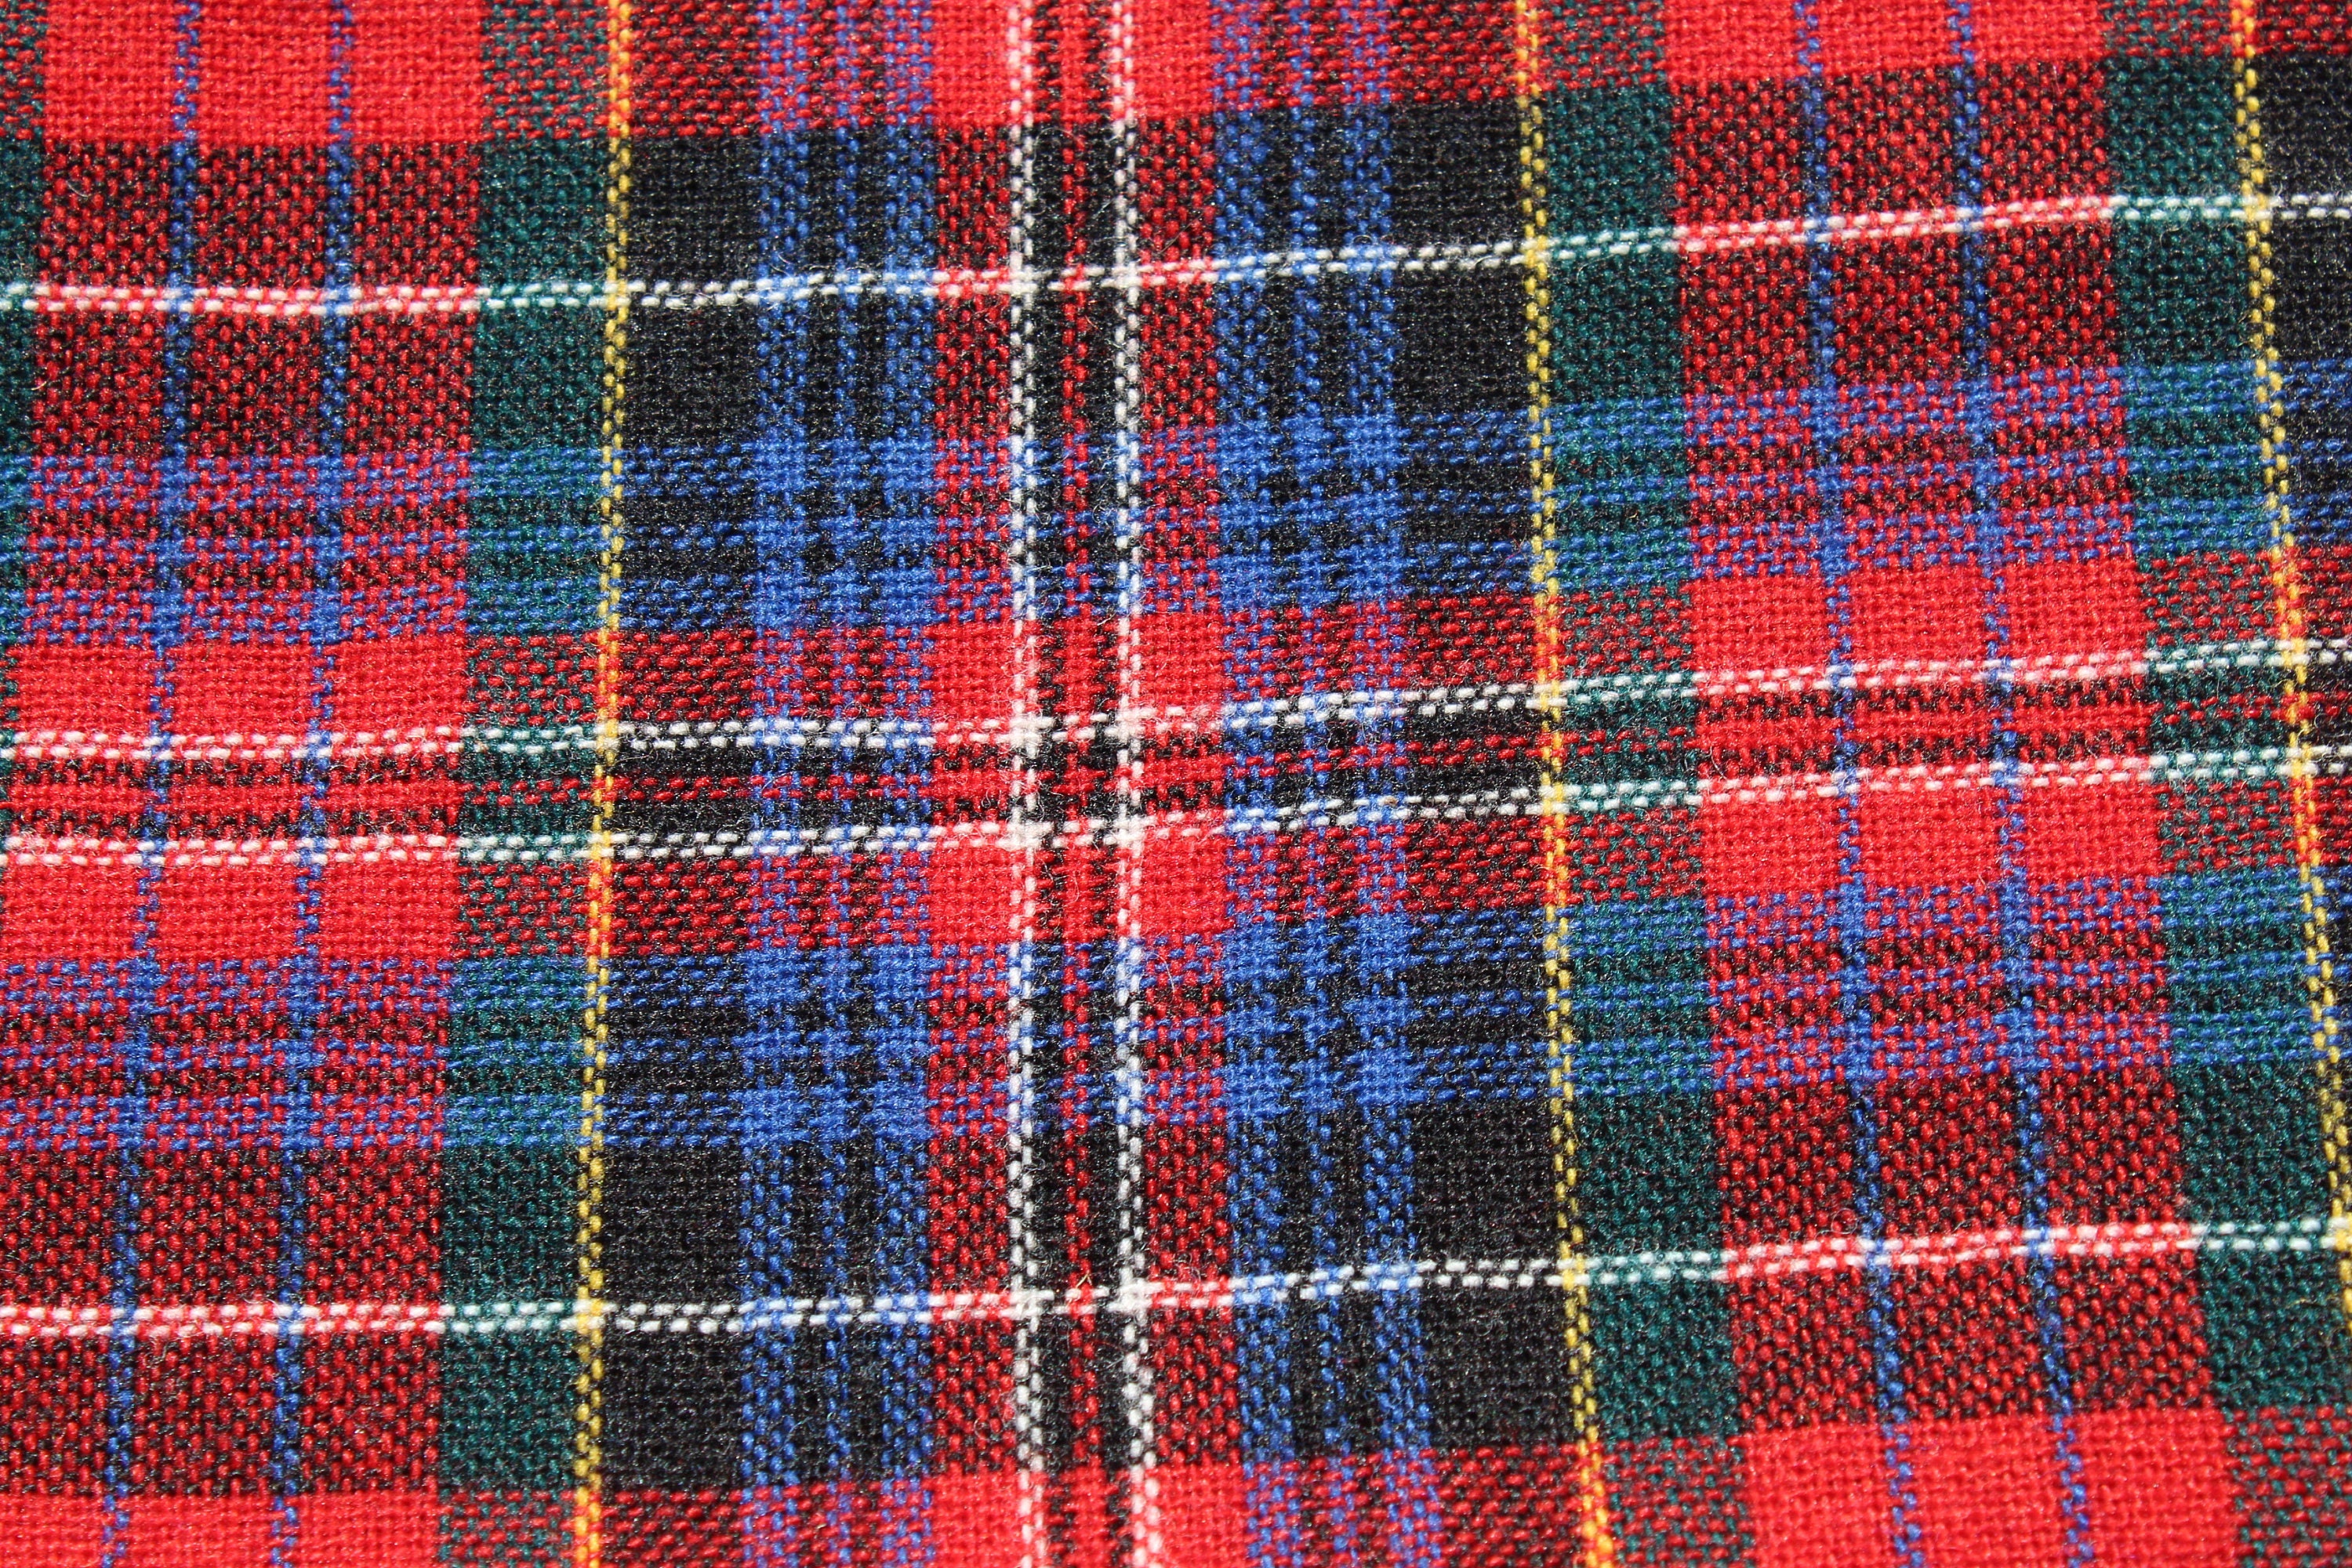 Red Blue Plaid Men's Shirt Wool Blend Fabric By The Half Yard, Skirt Dress Sewing Quilting, Christmas Holiday Material Bthy